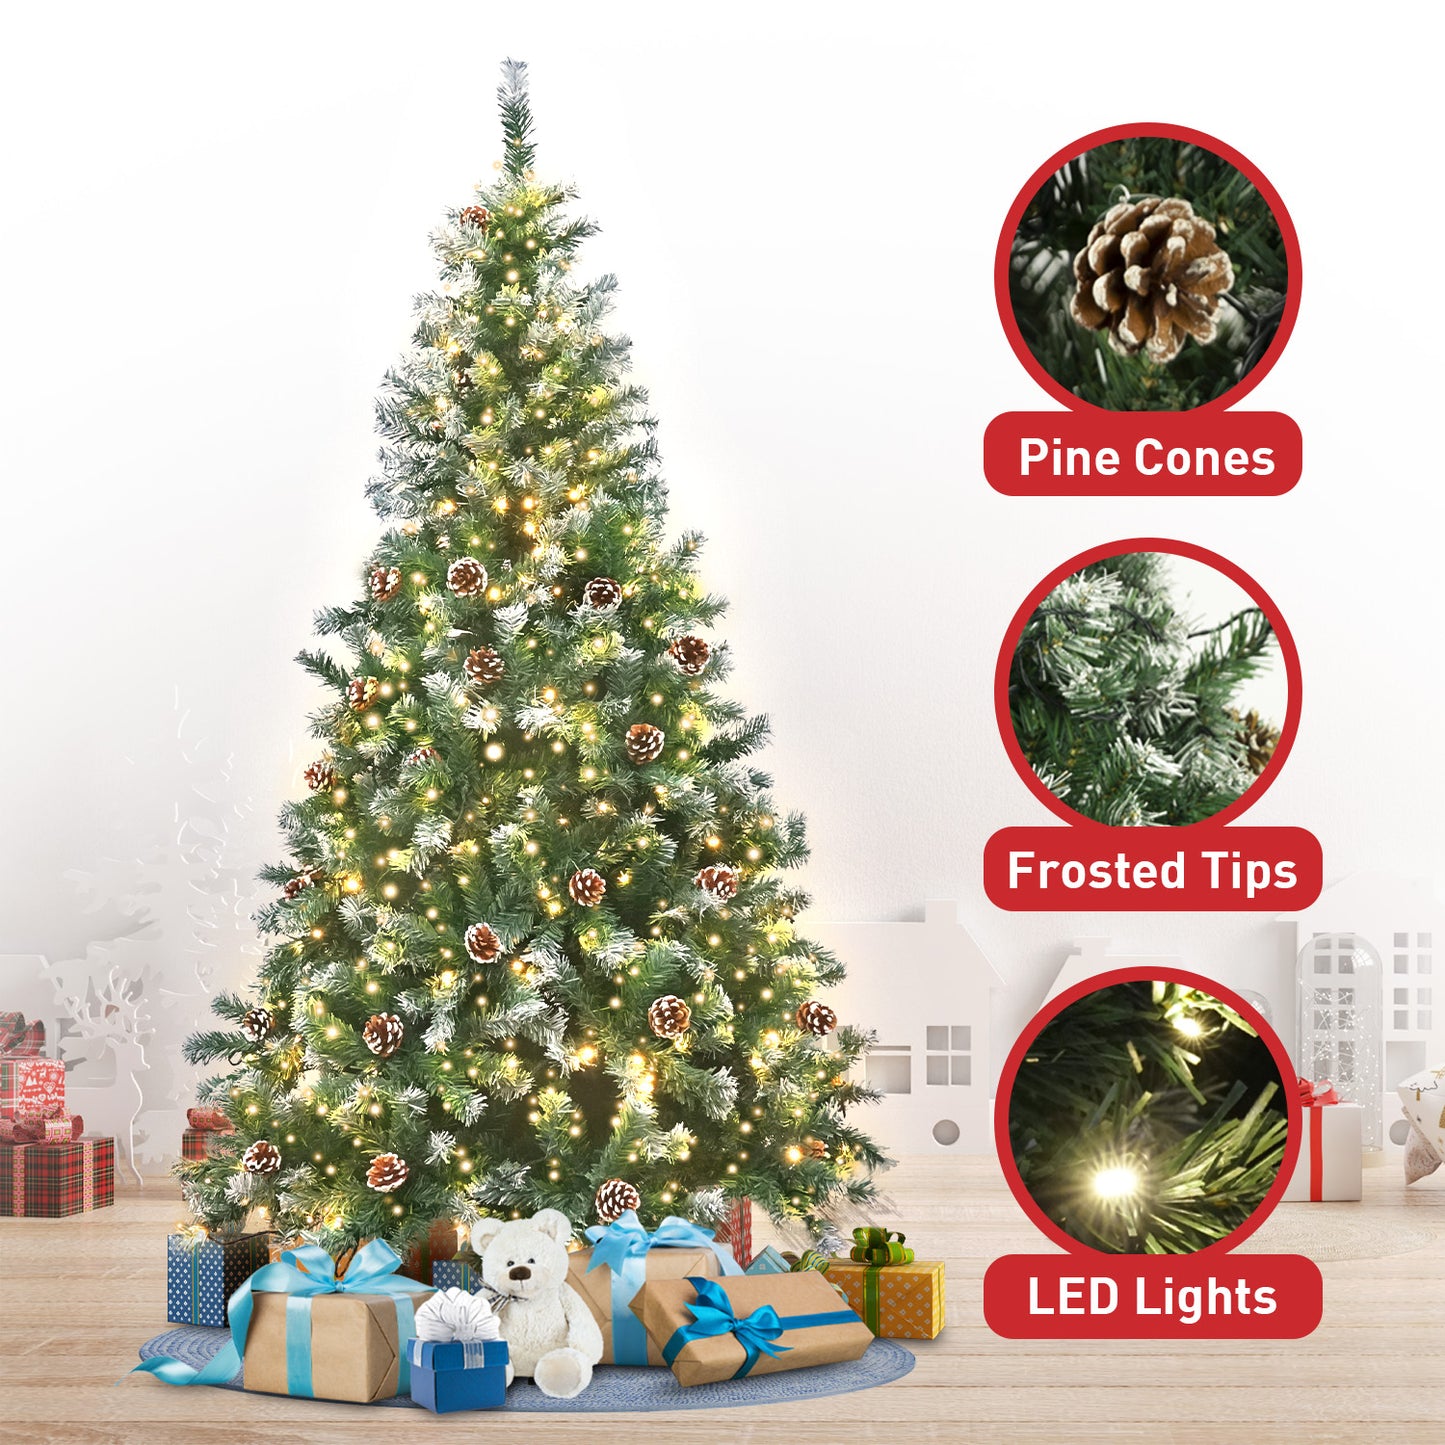 8ft 2.4m 1600 Tips Pre Lit Christmas Tree Decor with Pine Cones Xmas Decorations